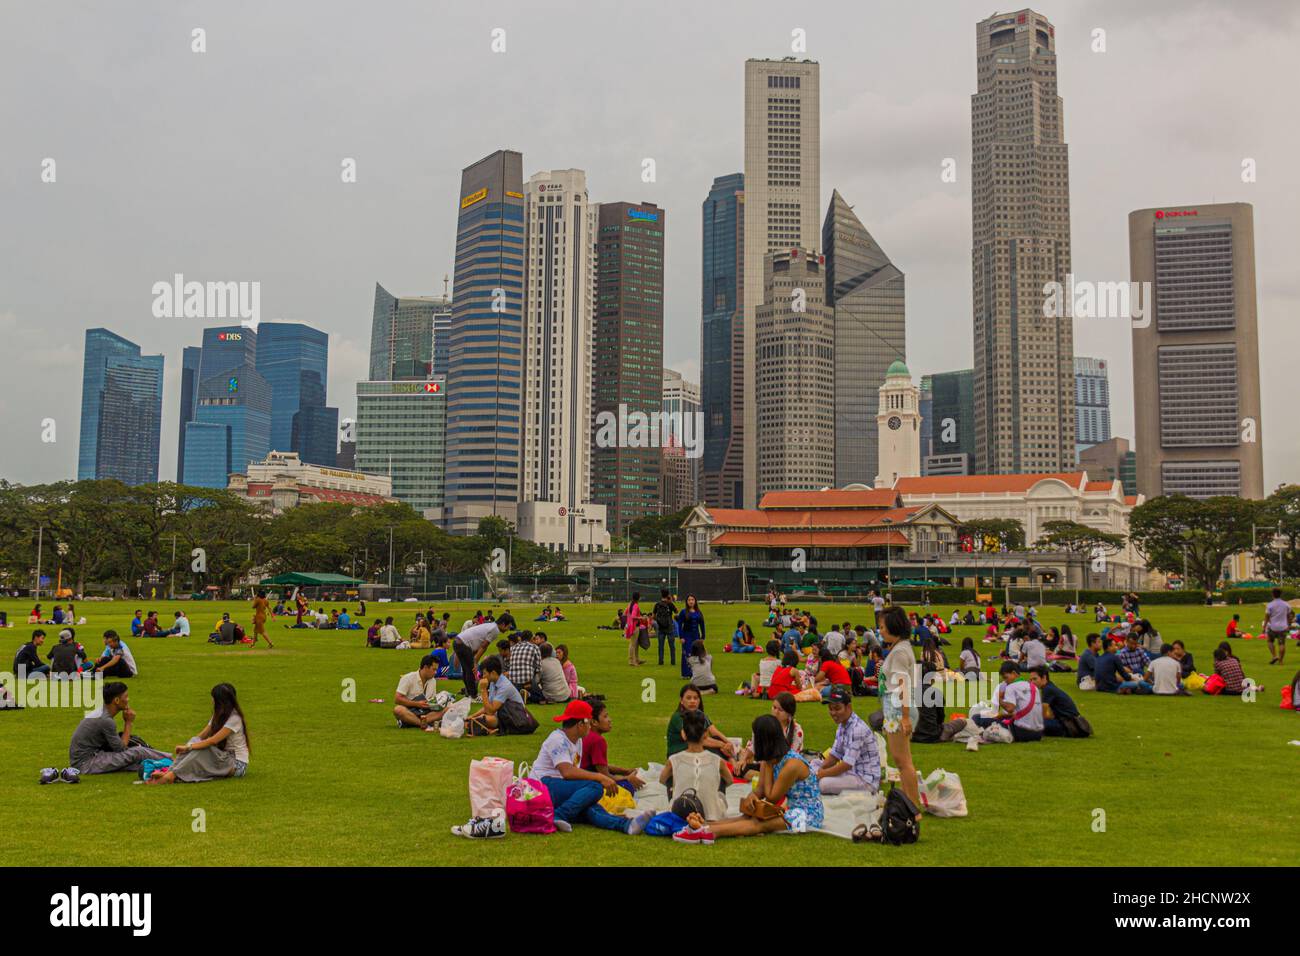 SINGAPORE, SINGAPORE - MARCH 11, 2018: People sit at the Padang ,open playing field in Singapore Stock Photo